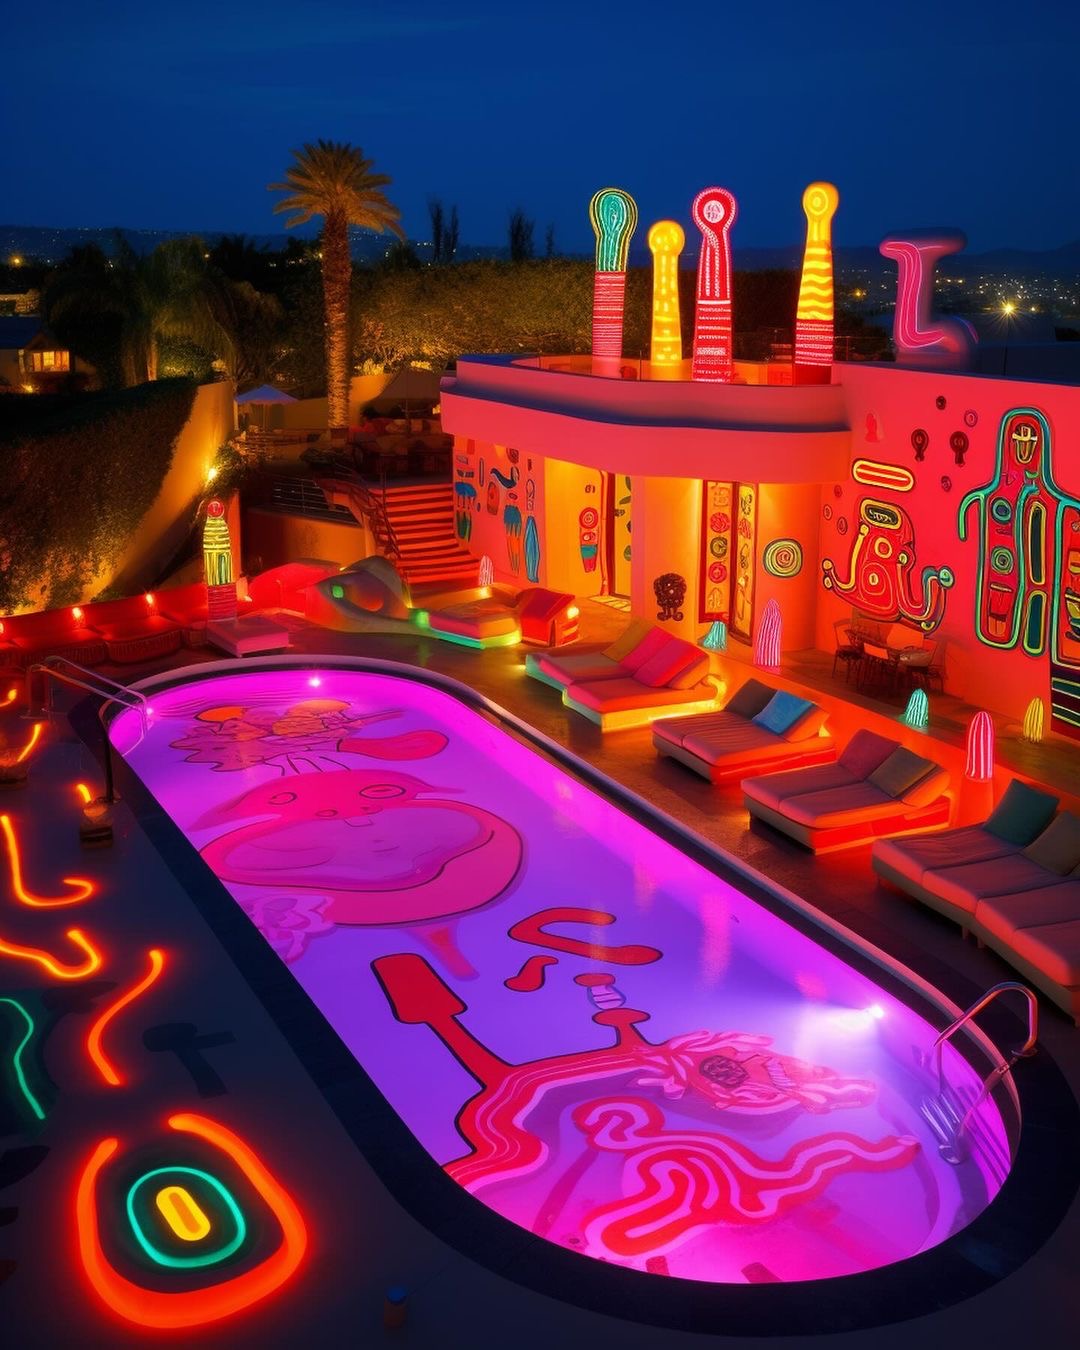 Eclectic Art in Your Modern Dream Home Swimming Pool